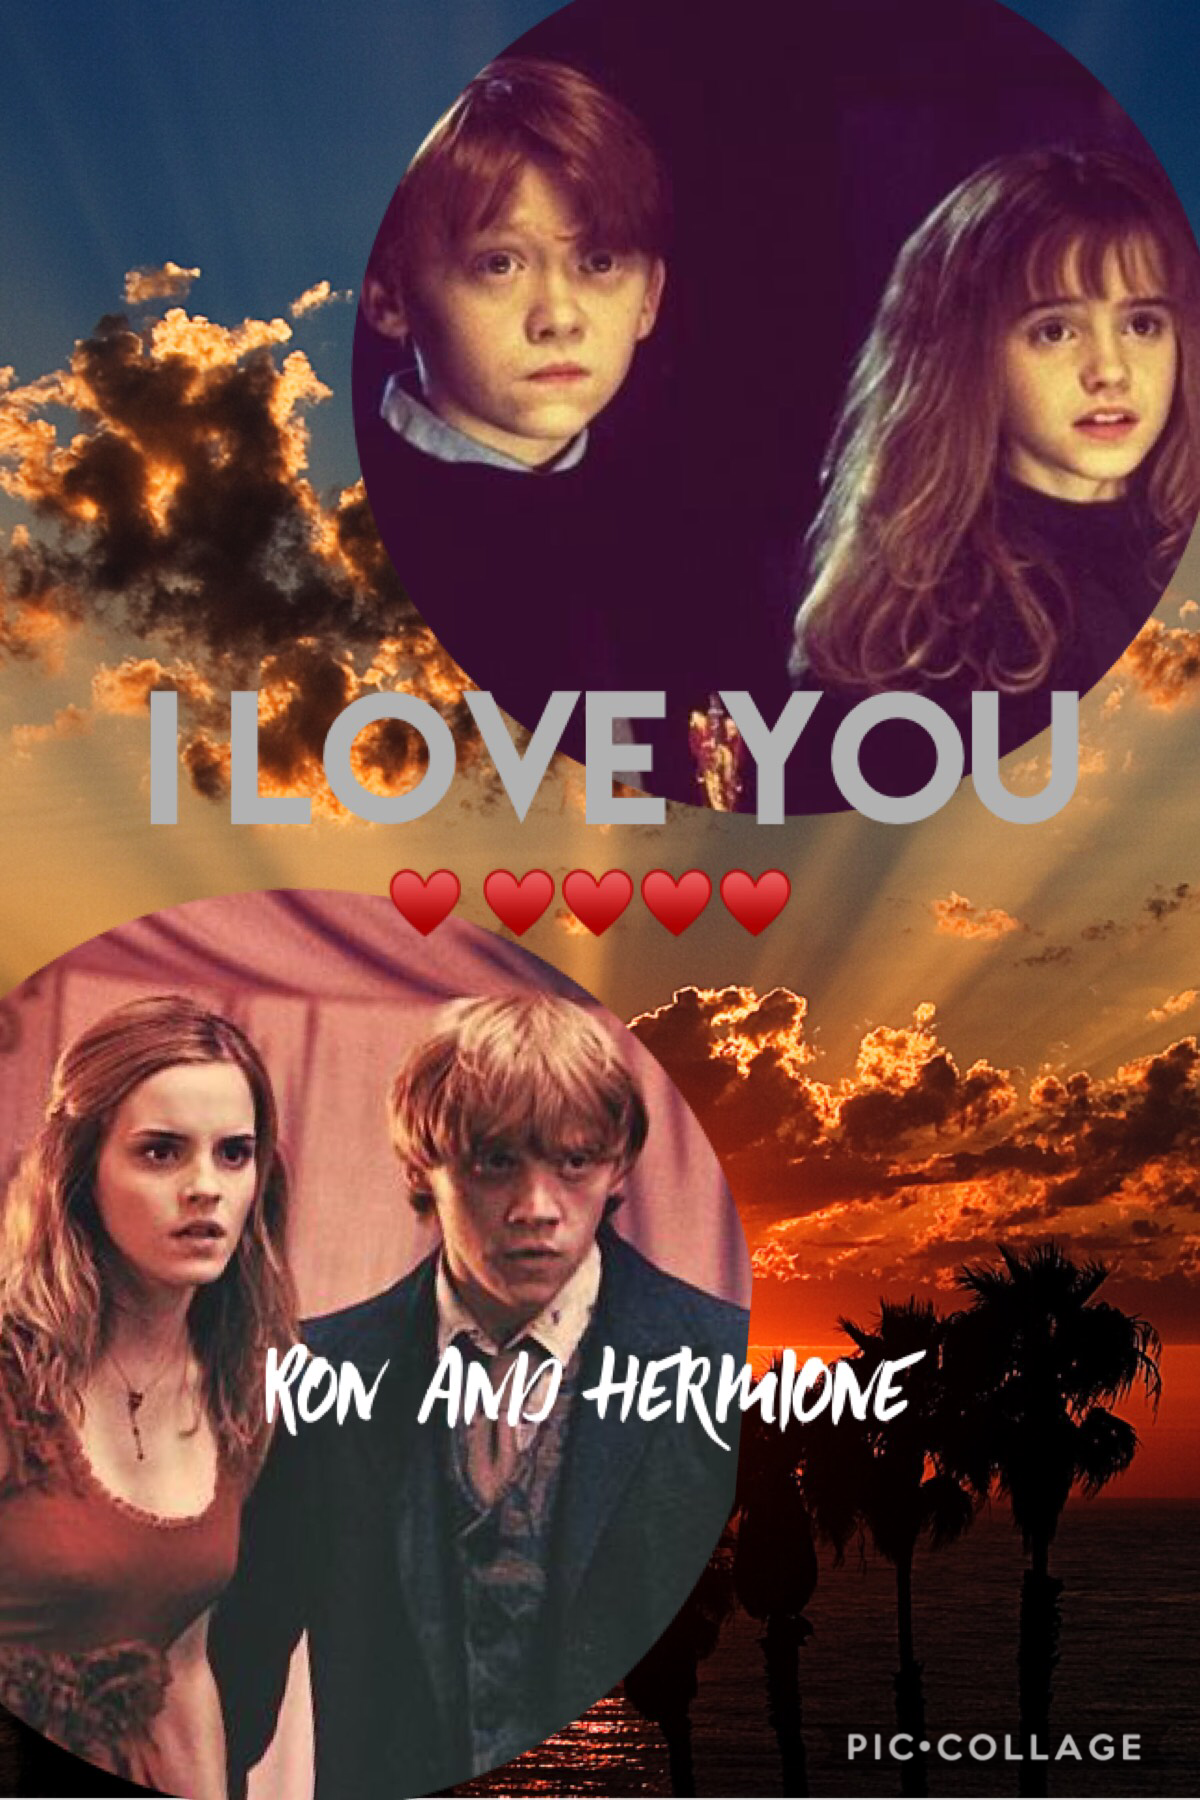 Collage by _harry_potter_nerd